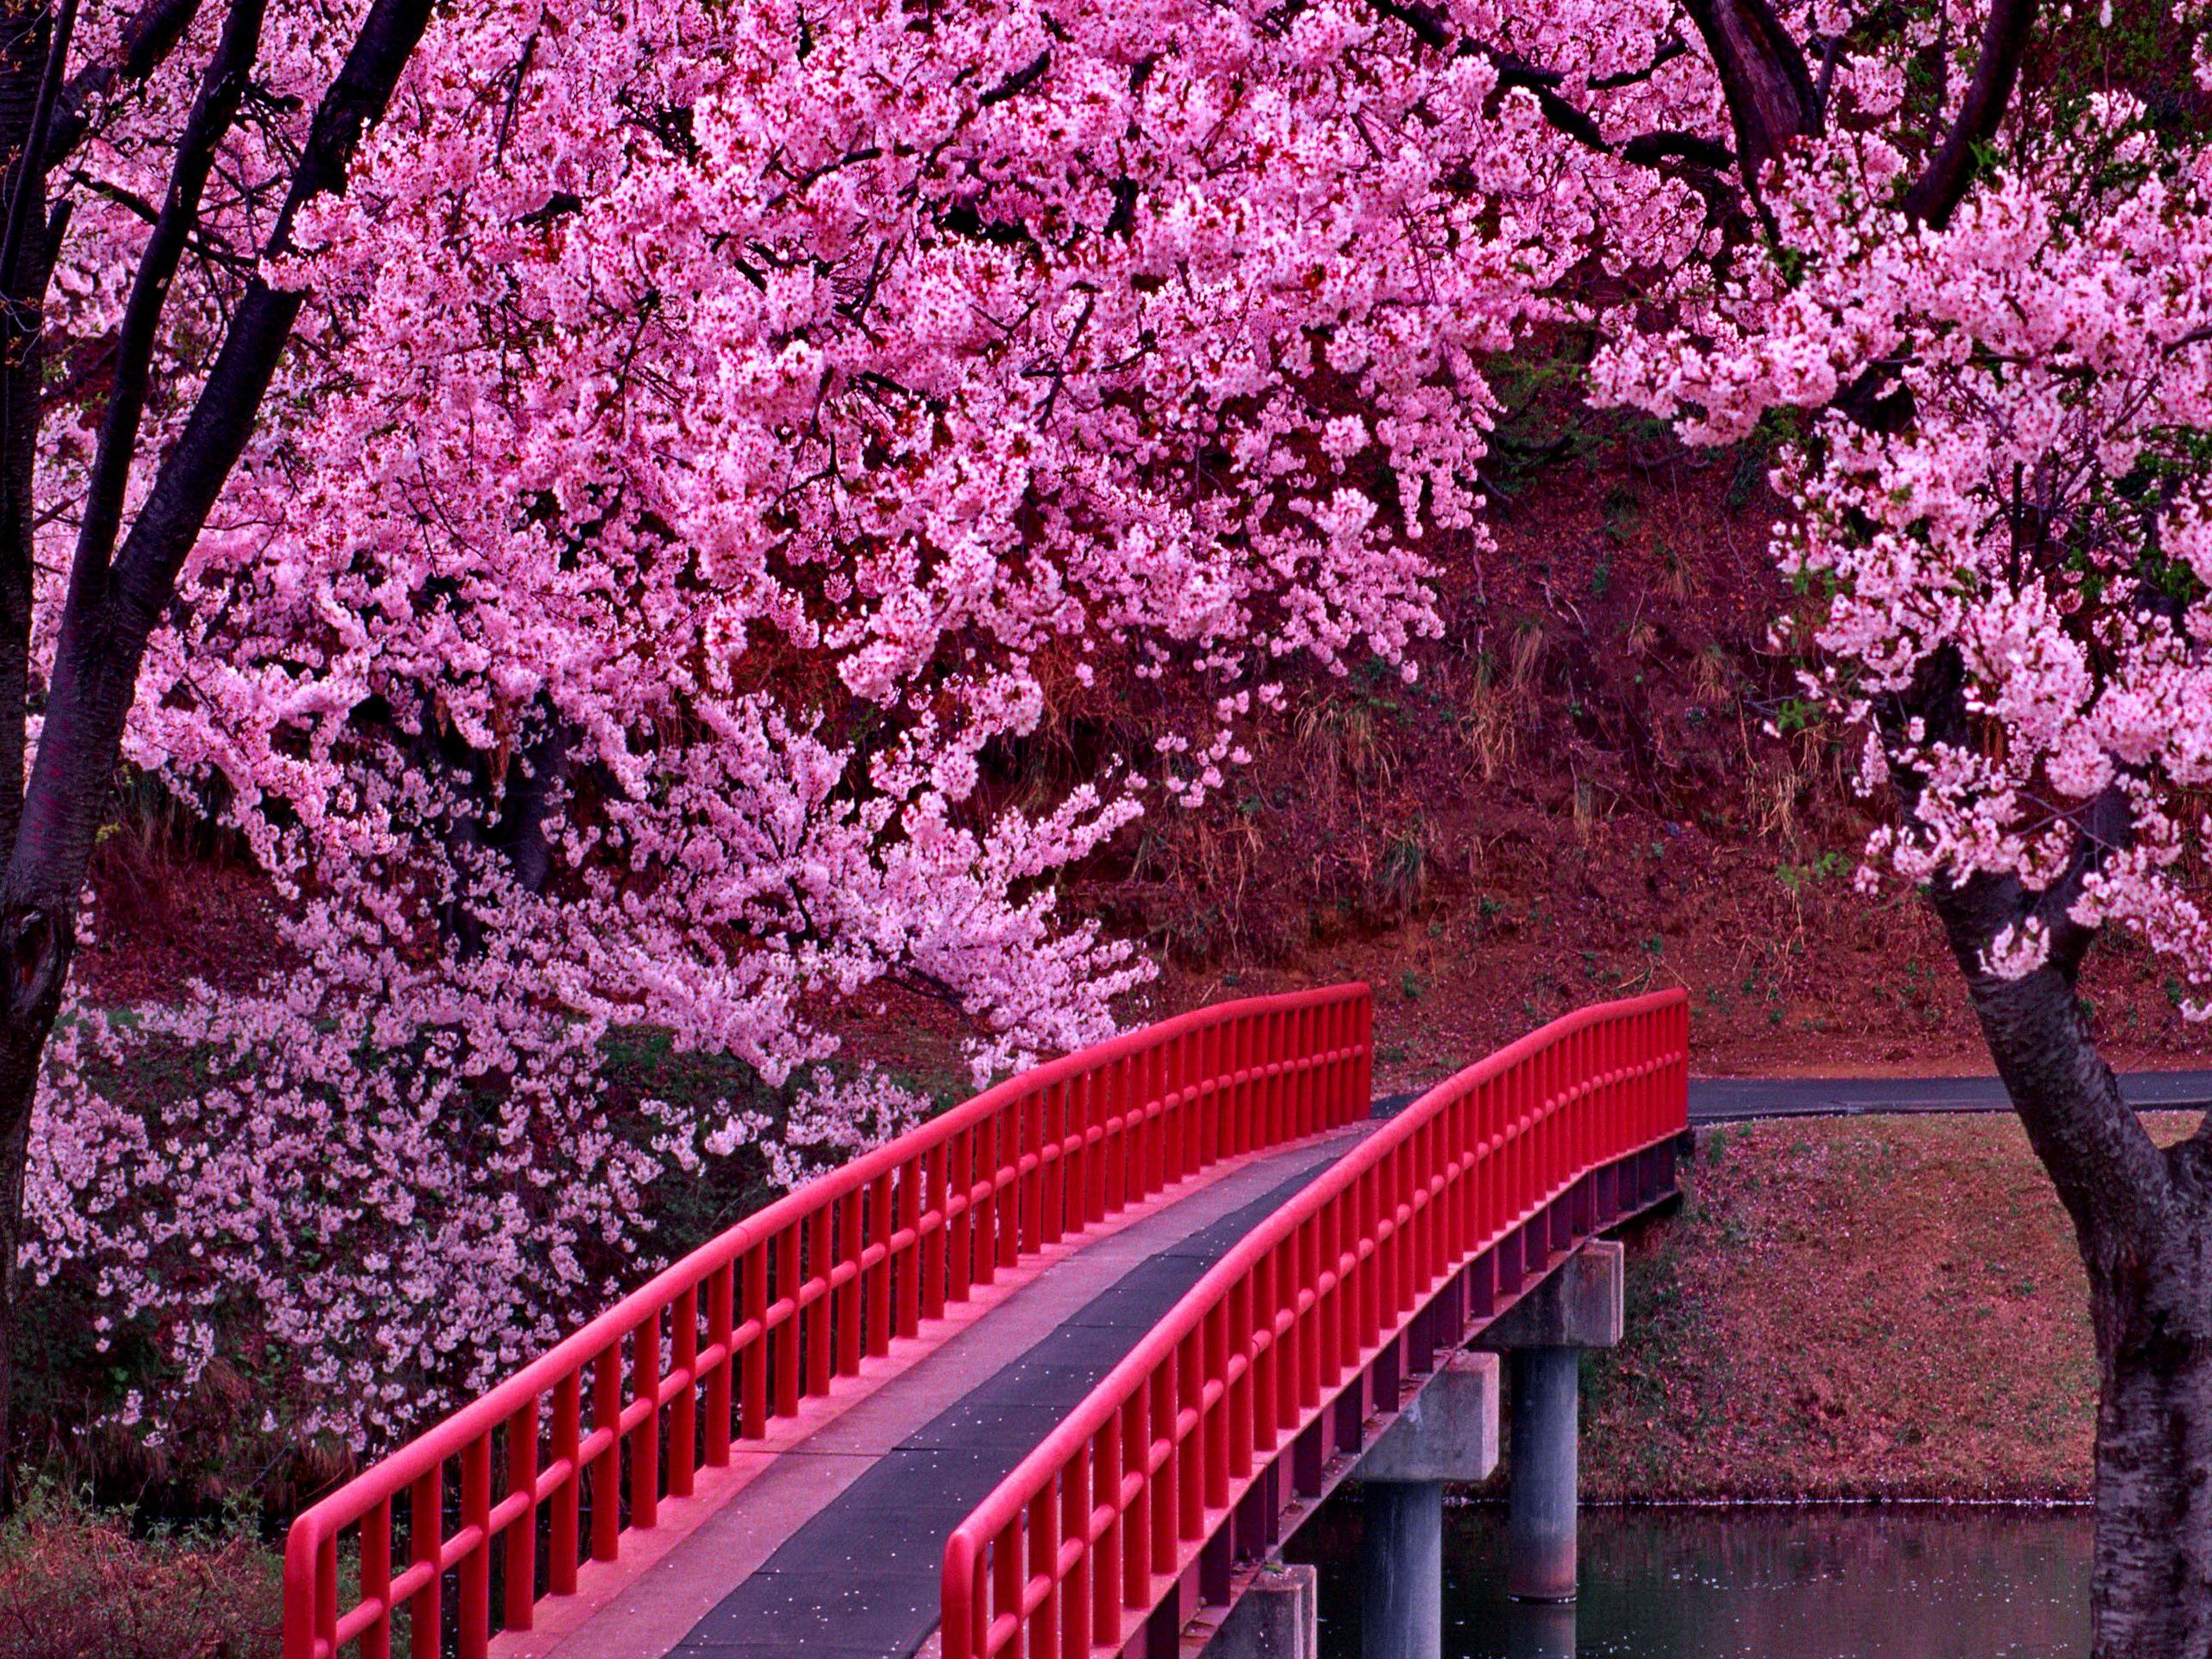 2560x1920 Pink Cherry Blossom Tree Wallpapers Top Free Pink Cherry Blossom Tree Backgrounds